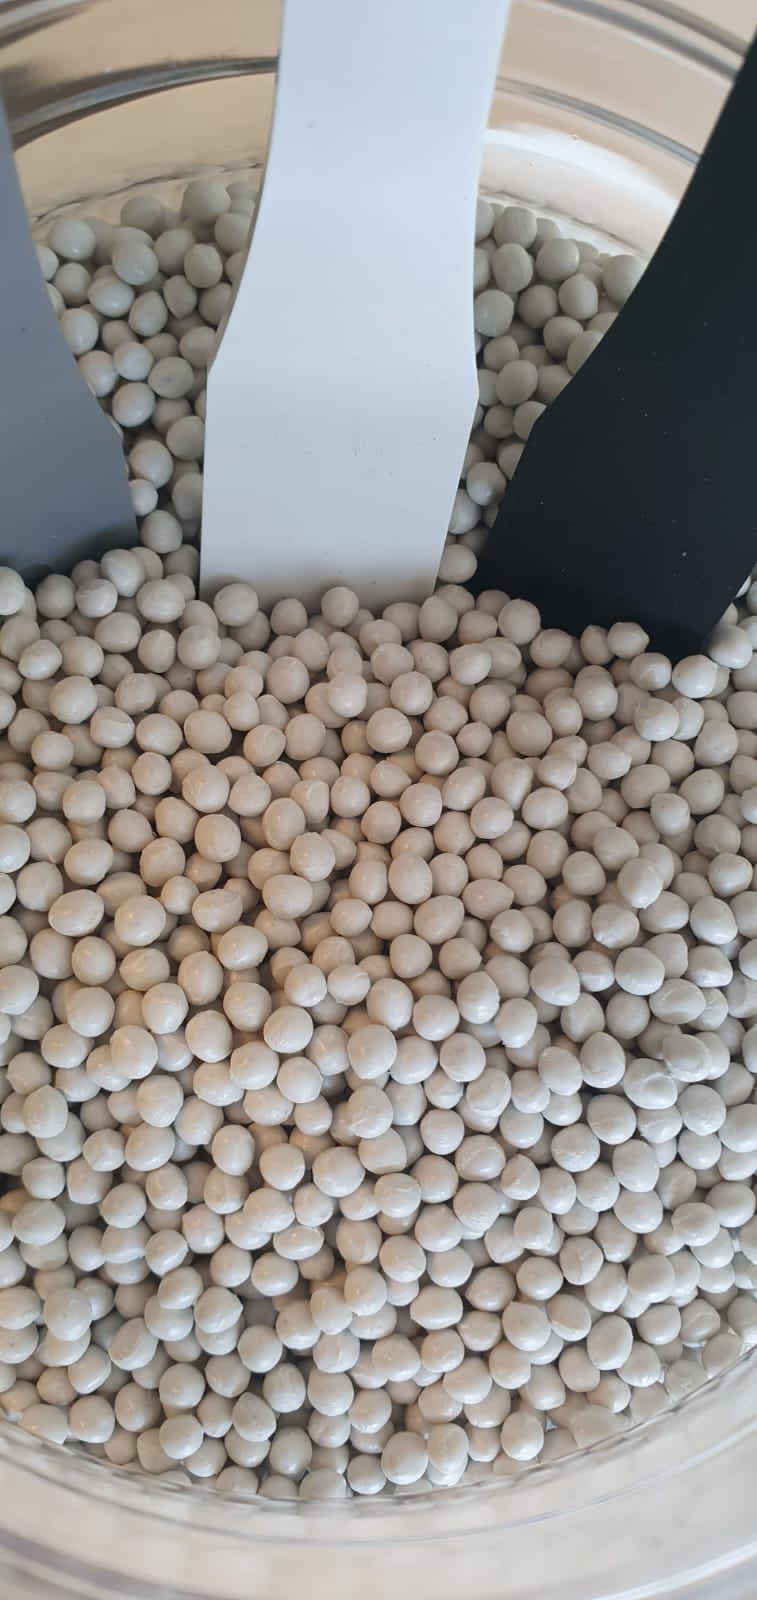 High Impact Polystyrene - PS Regranulate  exporters